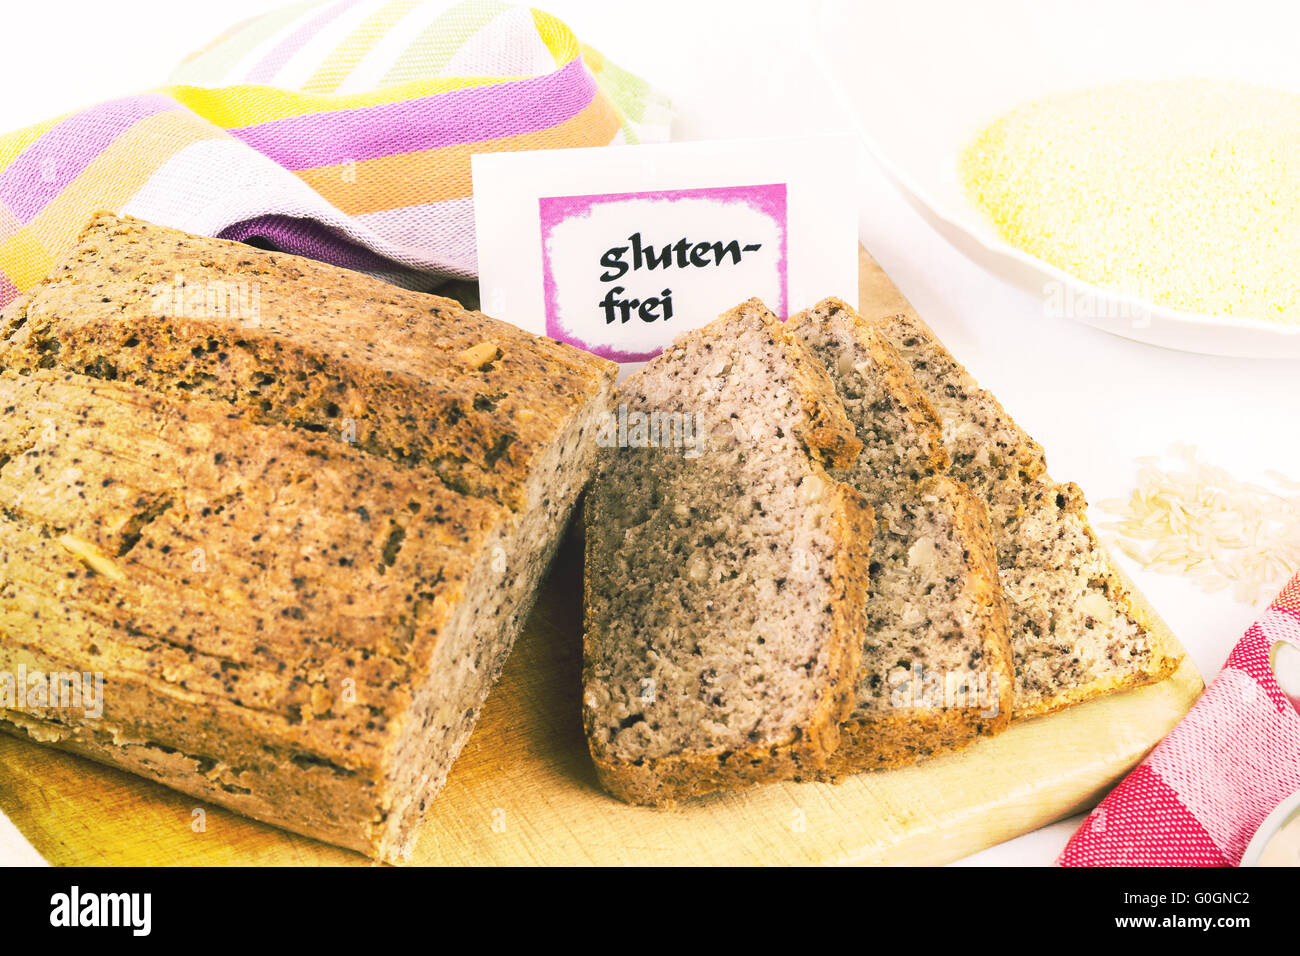 Wooden board with homemade, gluten-free wholemeal bread from rice and corn, isolated Stock Photo